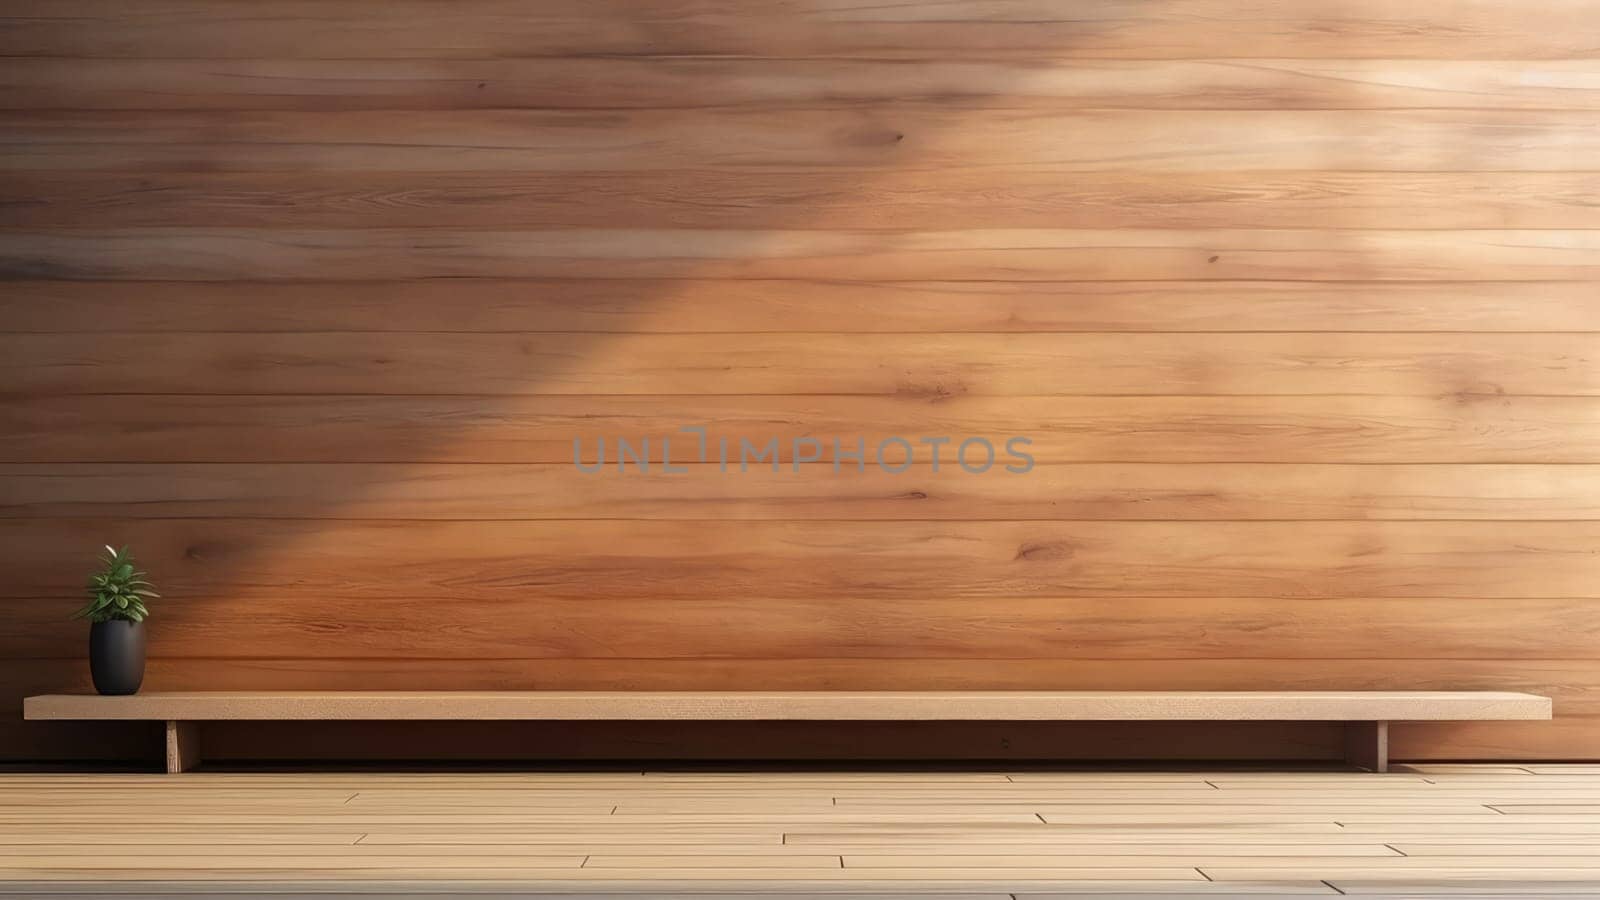 3D rendering of a wooden wall with a shelf and potted plants on it. The wall is made of dark wood and has a smooth finish.